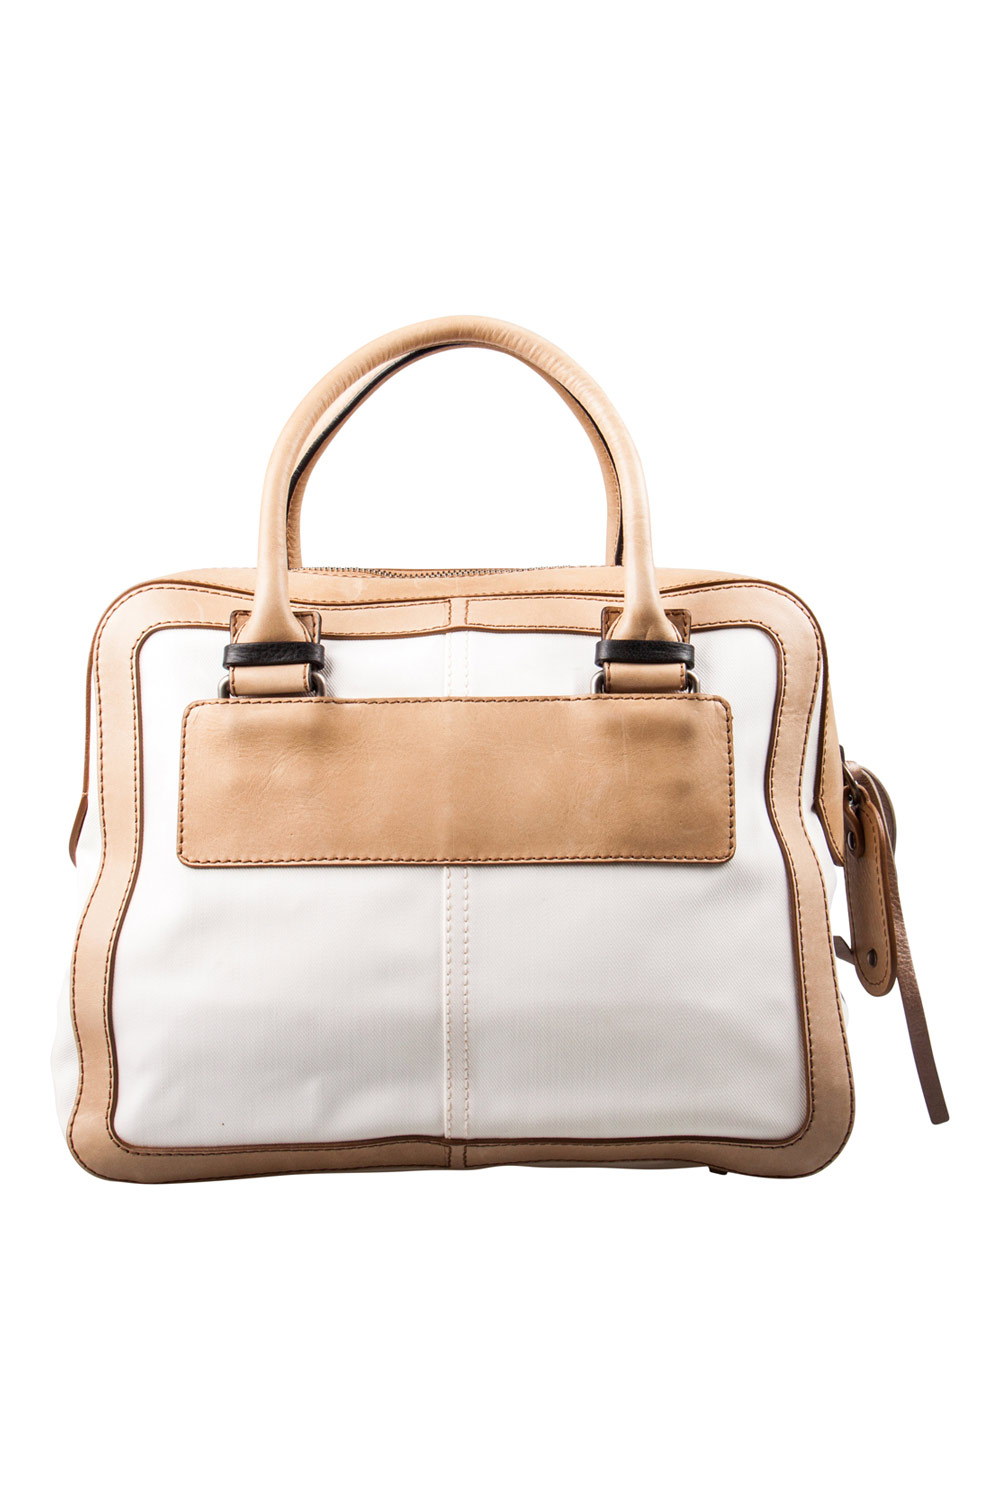 Chloe Beige/White Canvas and Leather Satchel